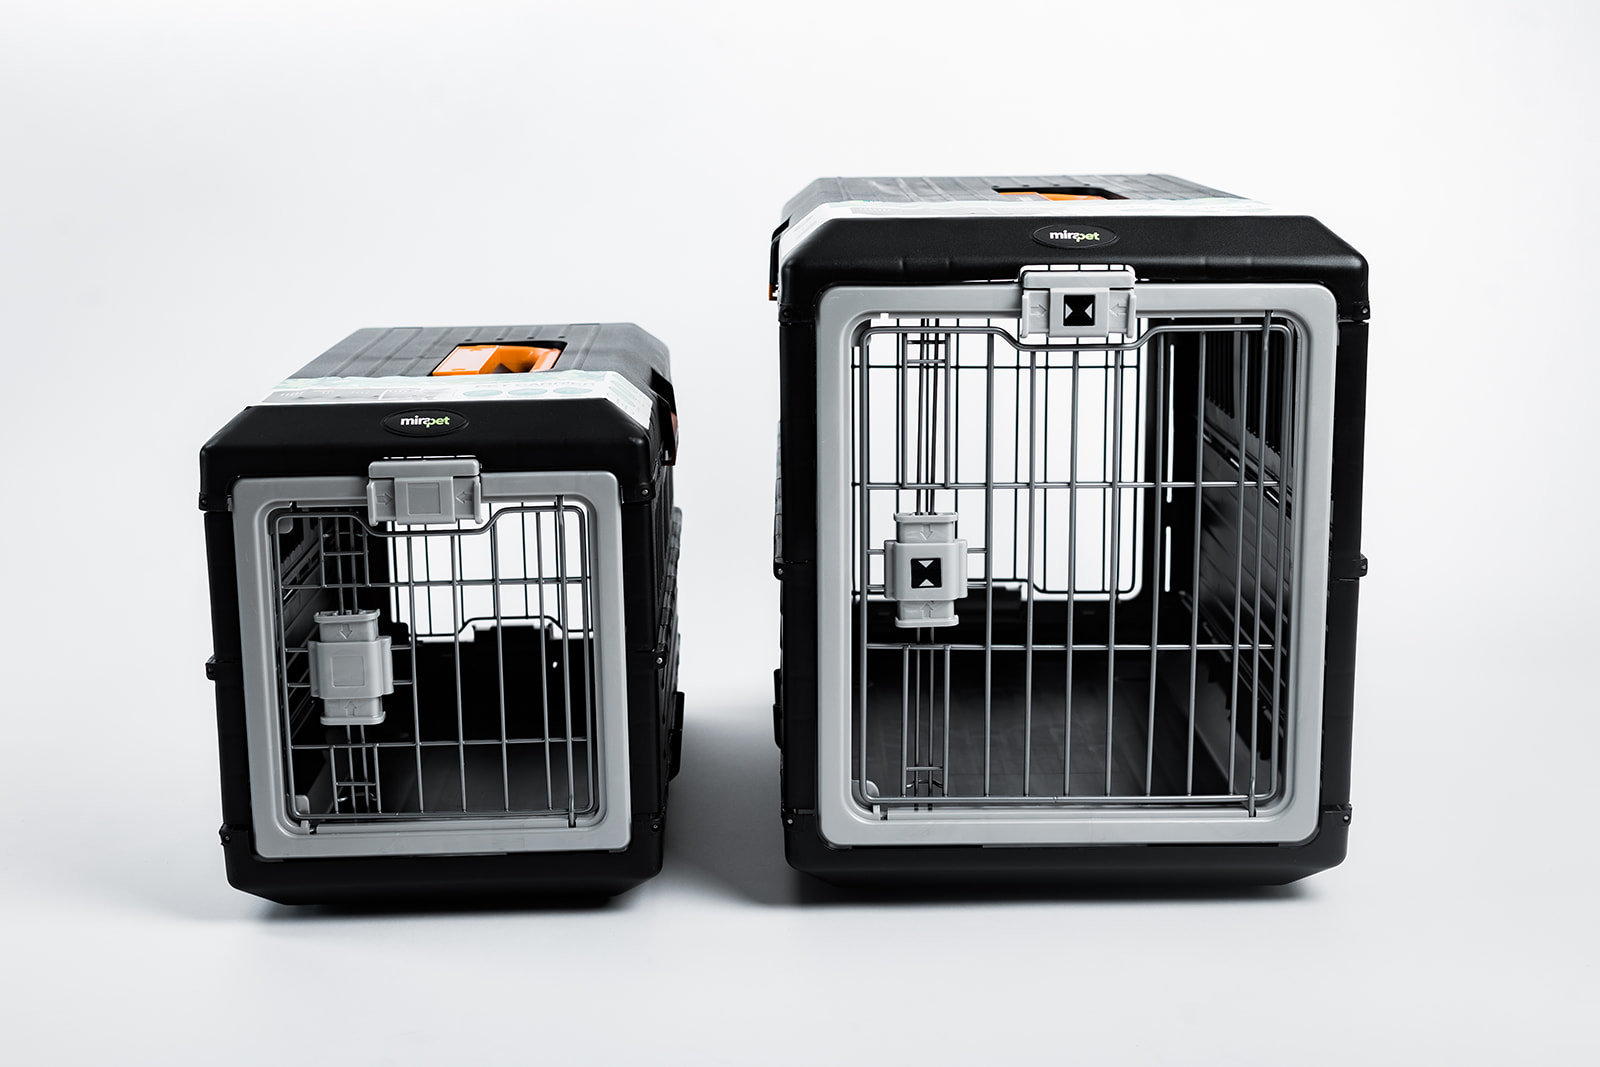 i.Pet Pet Carrier Soft Crate Dog Cat Travel Portable Cage Kennel